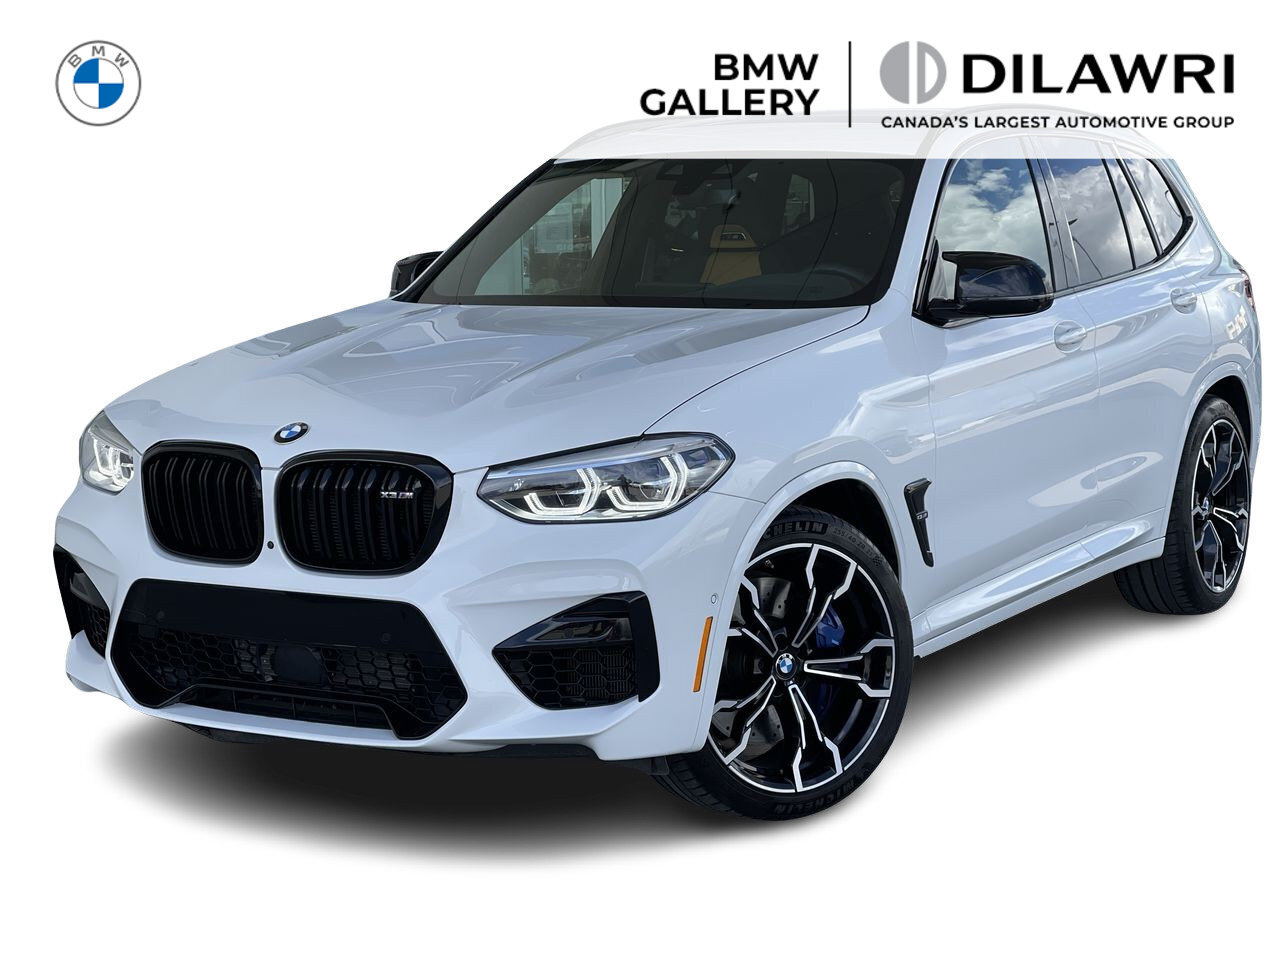 2020 BMW X3 M Competiton, 503 HP, Leather, Nav Locally Owned / 